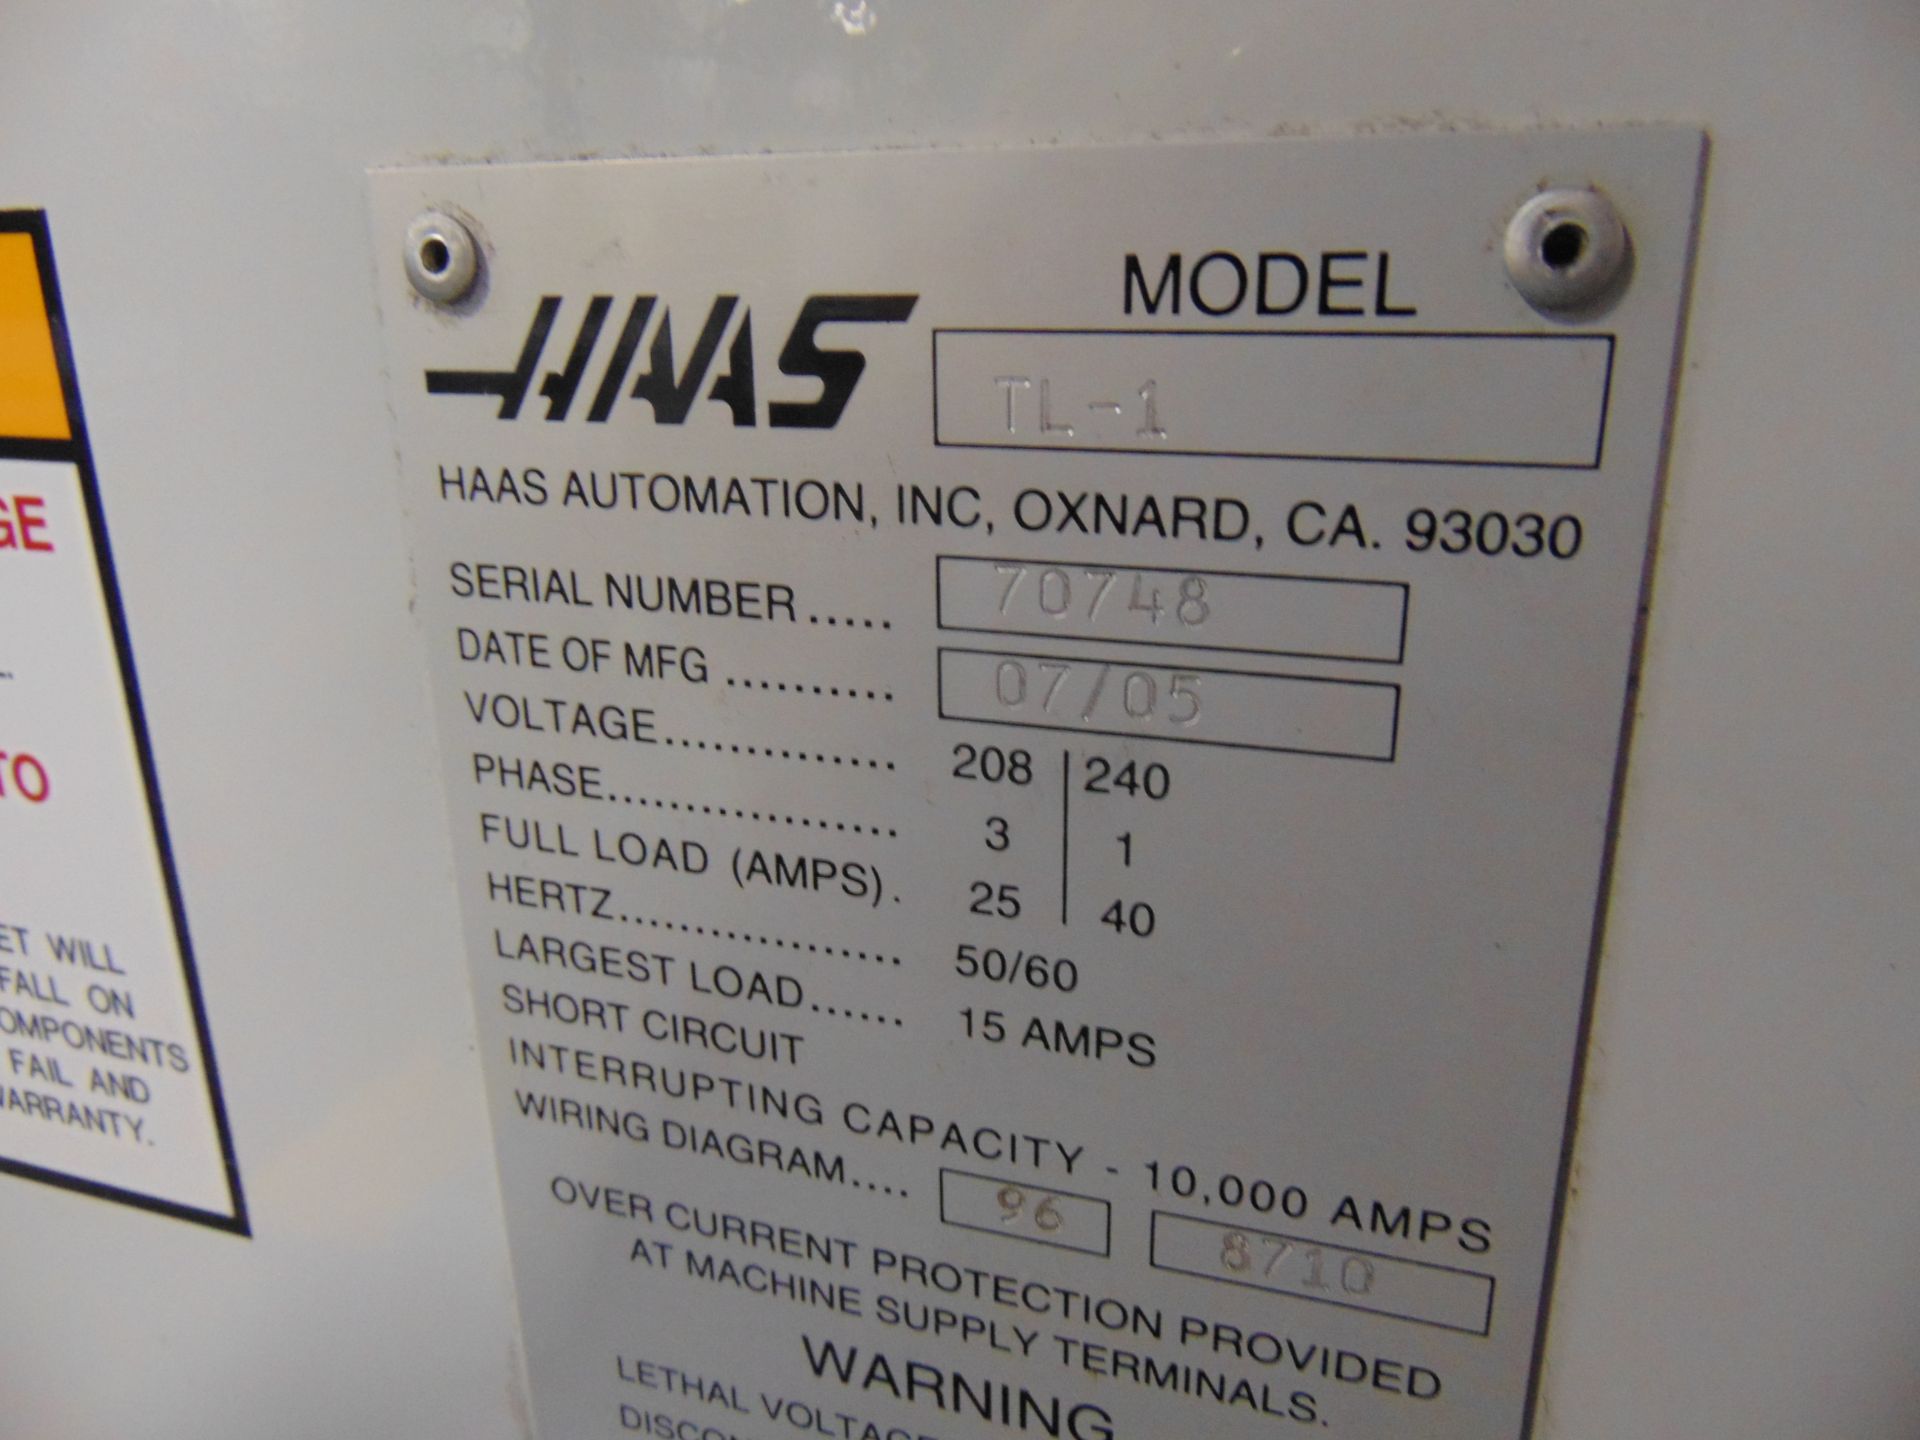 2005 HAAS 2-AXIS CNC LATHE - Image 7 of 8